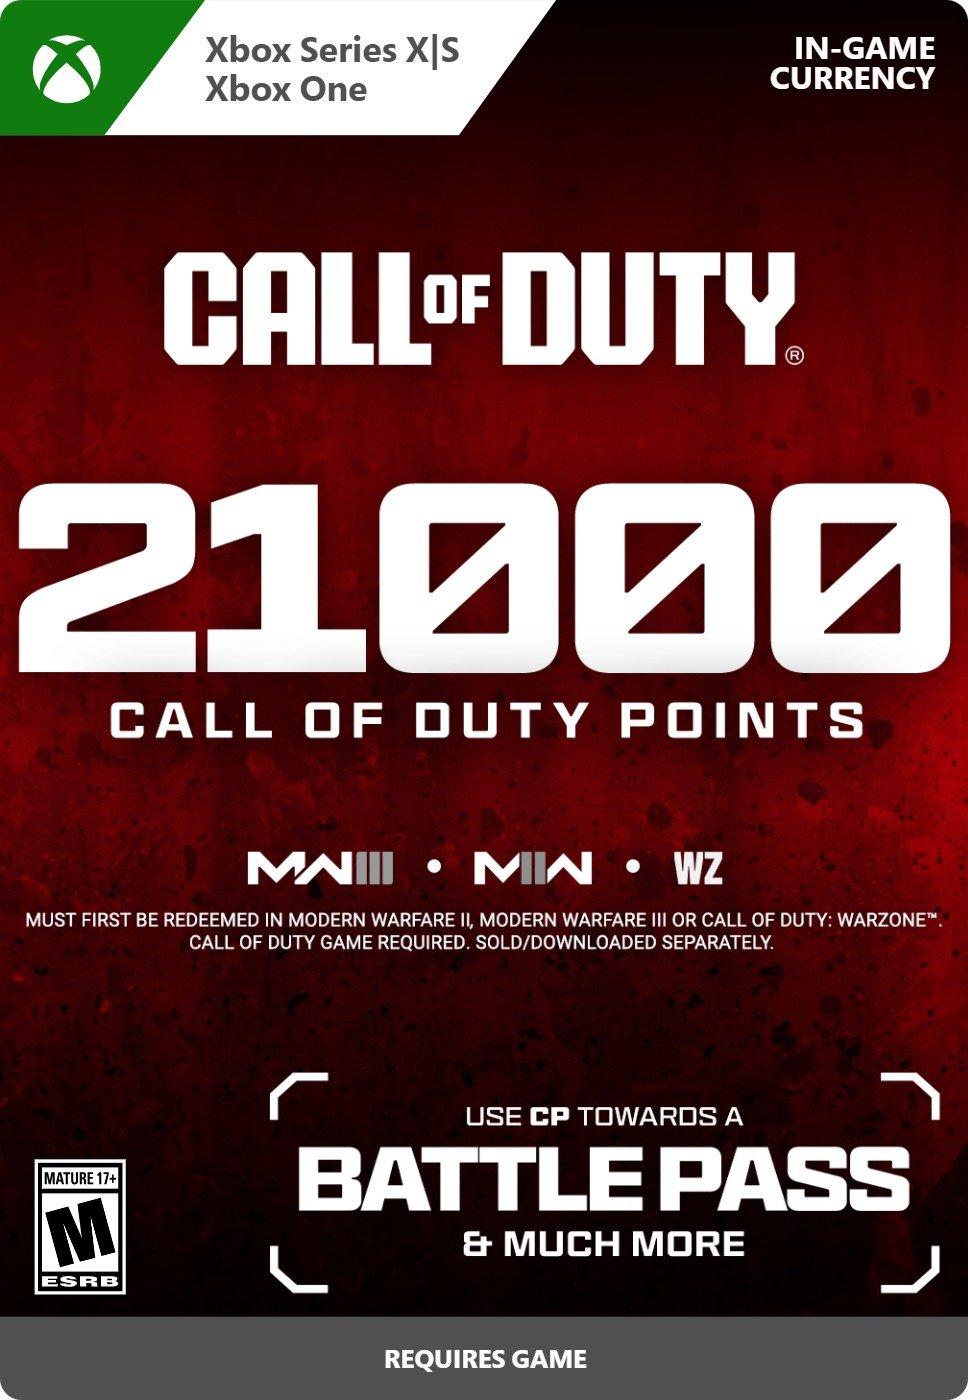 Call of Duty Points 21,000